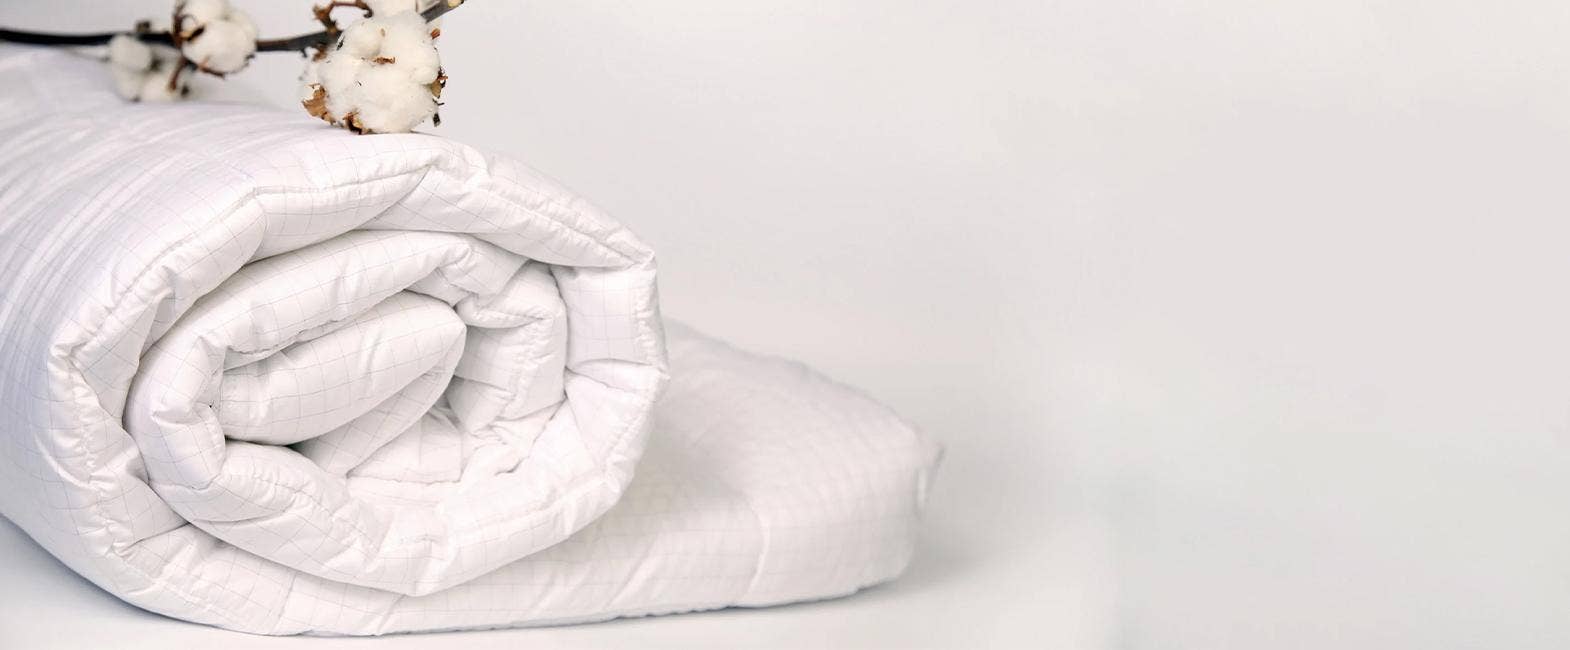 Choosing the Right Duvet: A Guide to Fill Power, Fill Weight, and Shell Material